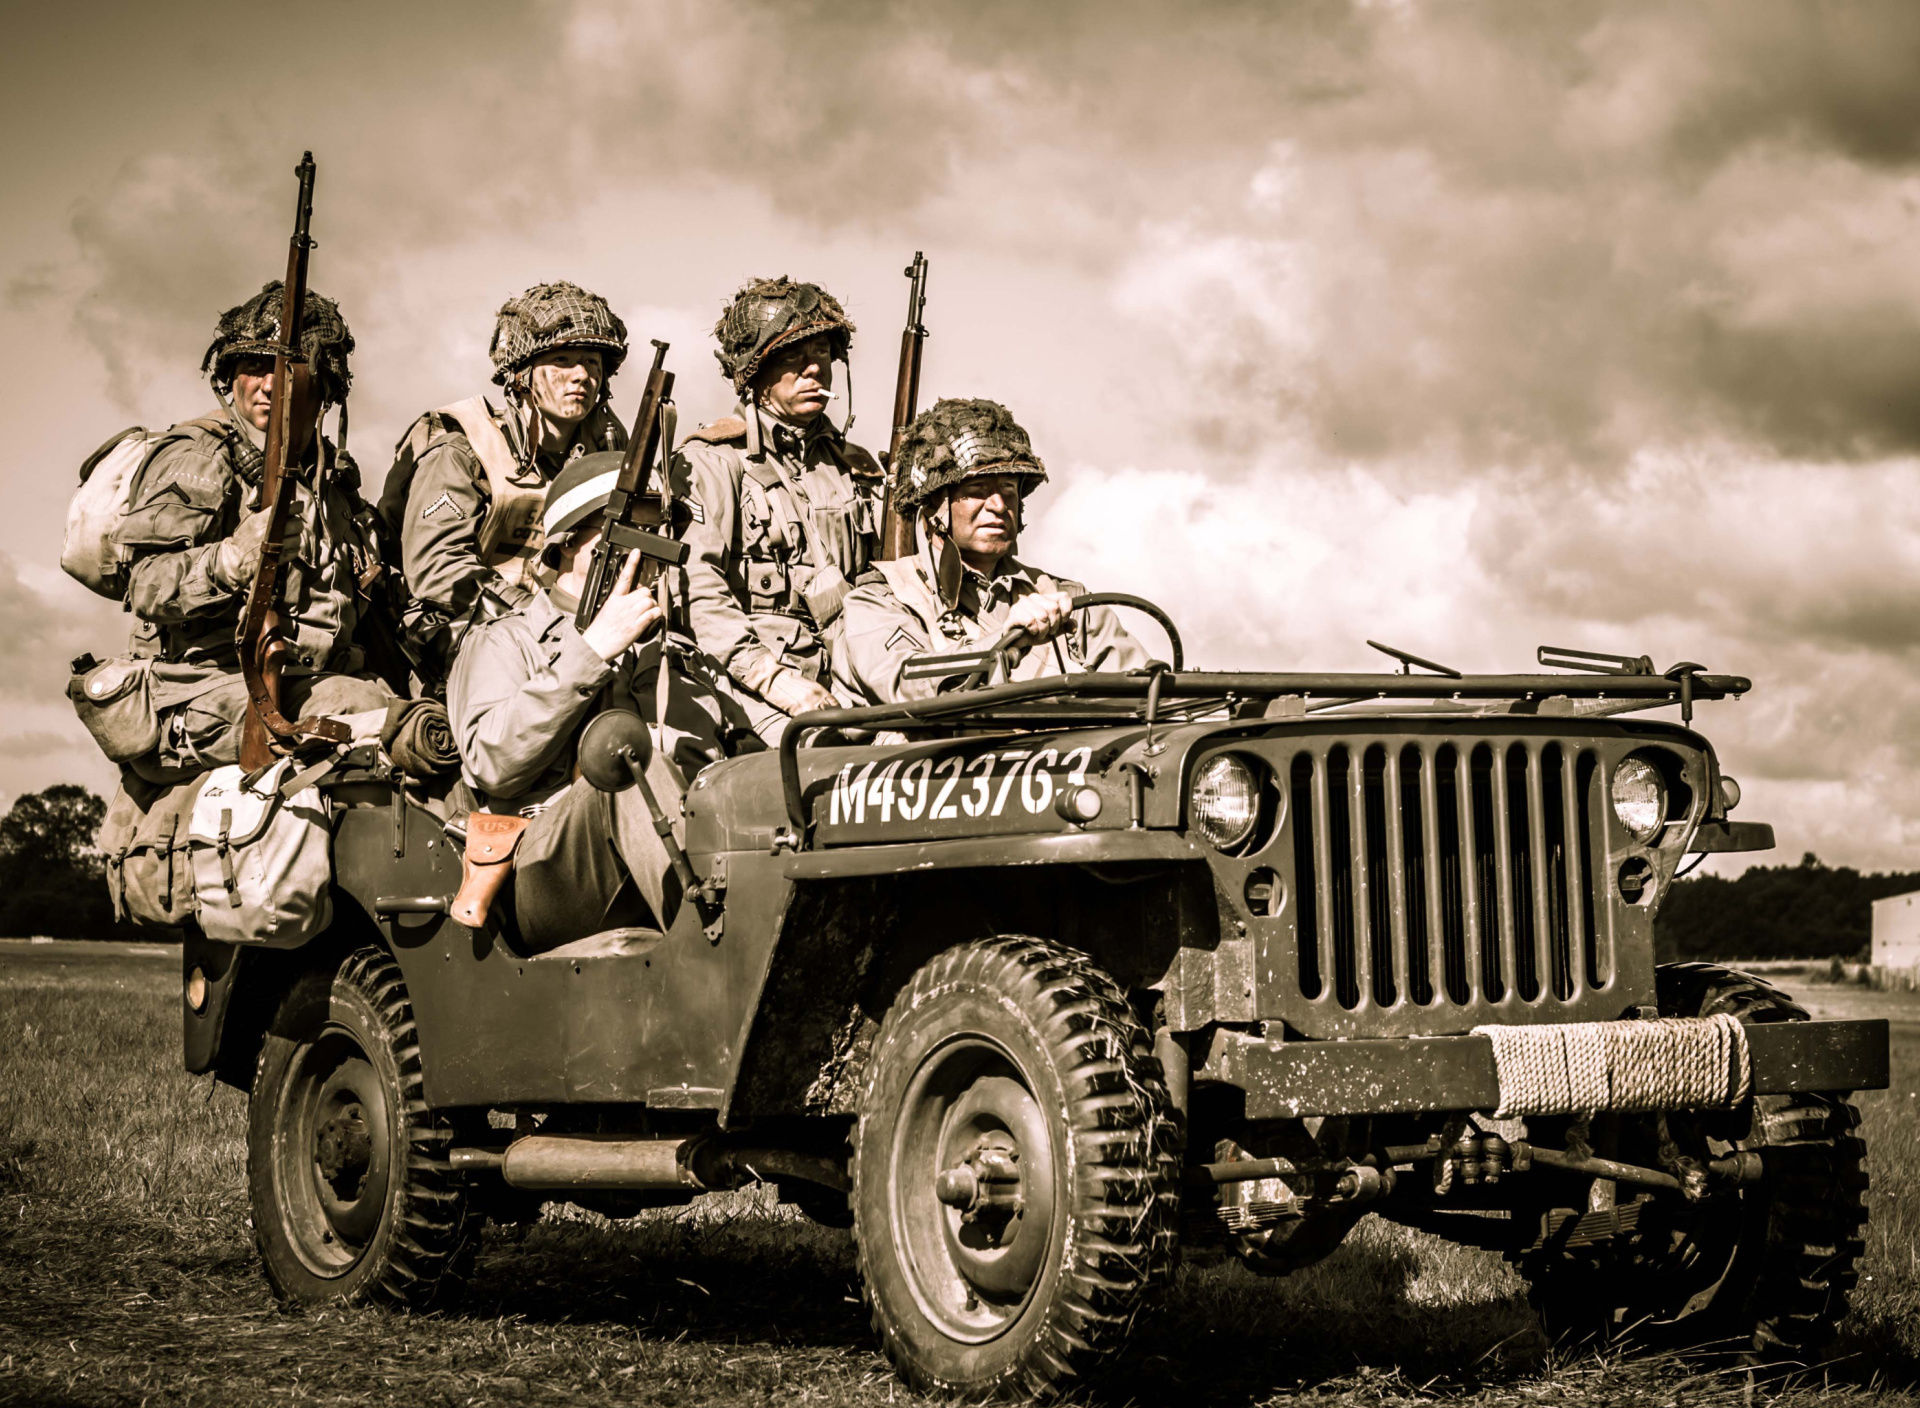 Das Soldiers on Jeep Wallpaper 1920x1408